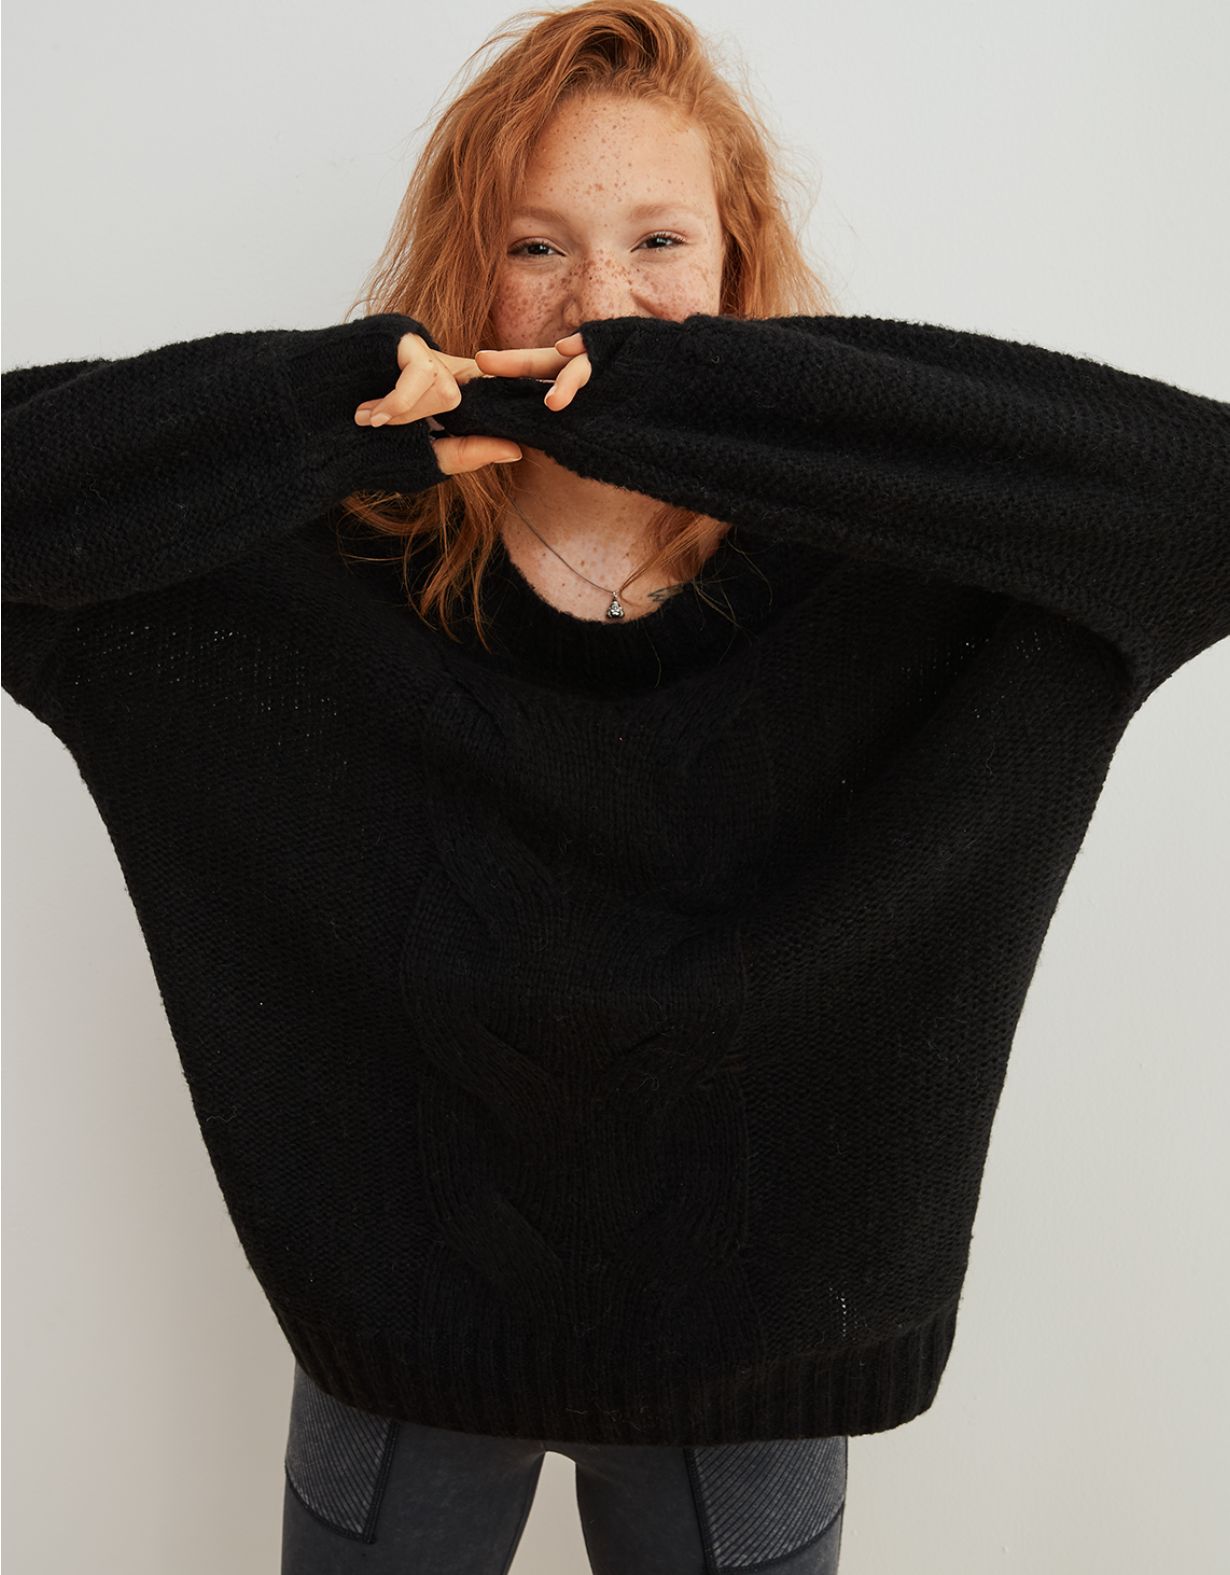 Aerie Oversized Happy Place Cable Sweater